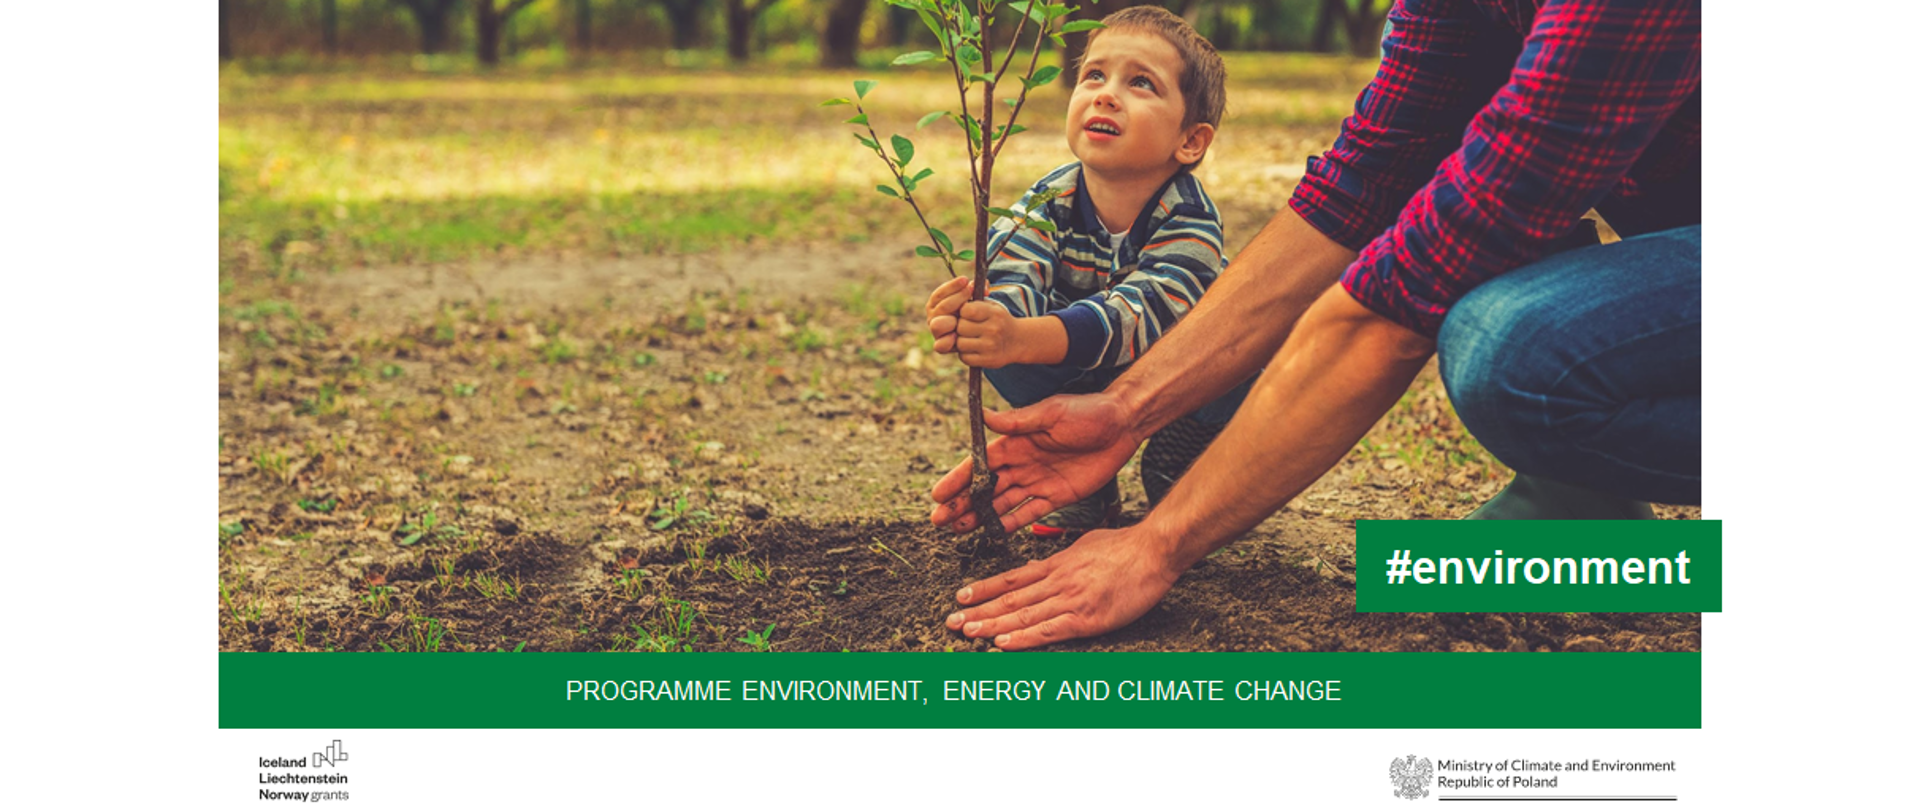 Environment, Energy and Climate Change Programme #environment NGO's